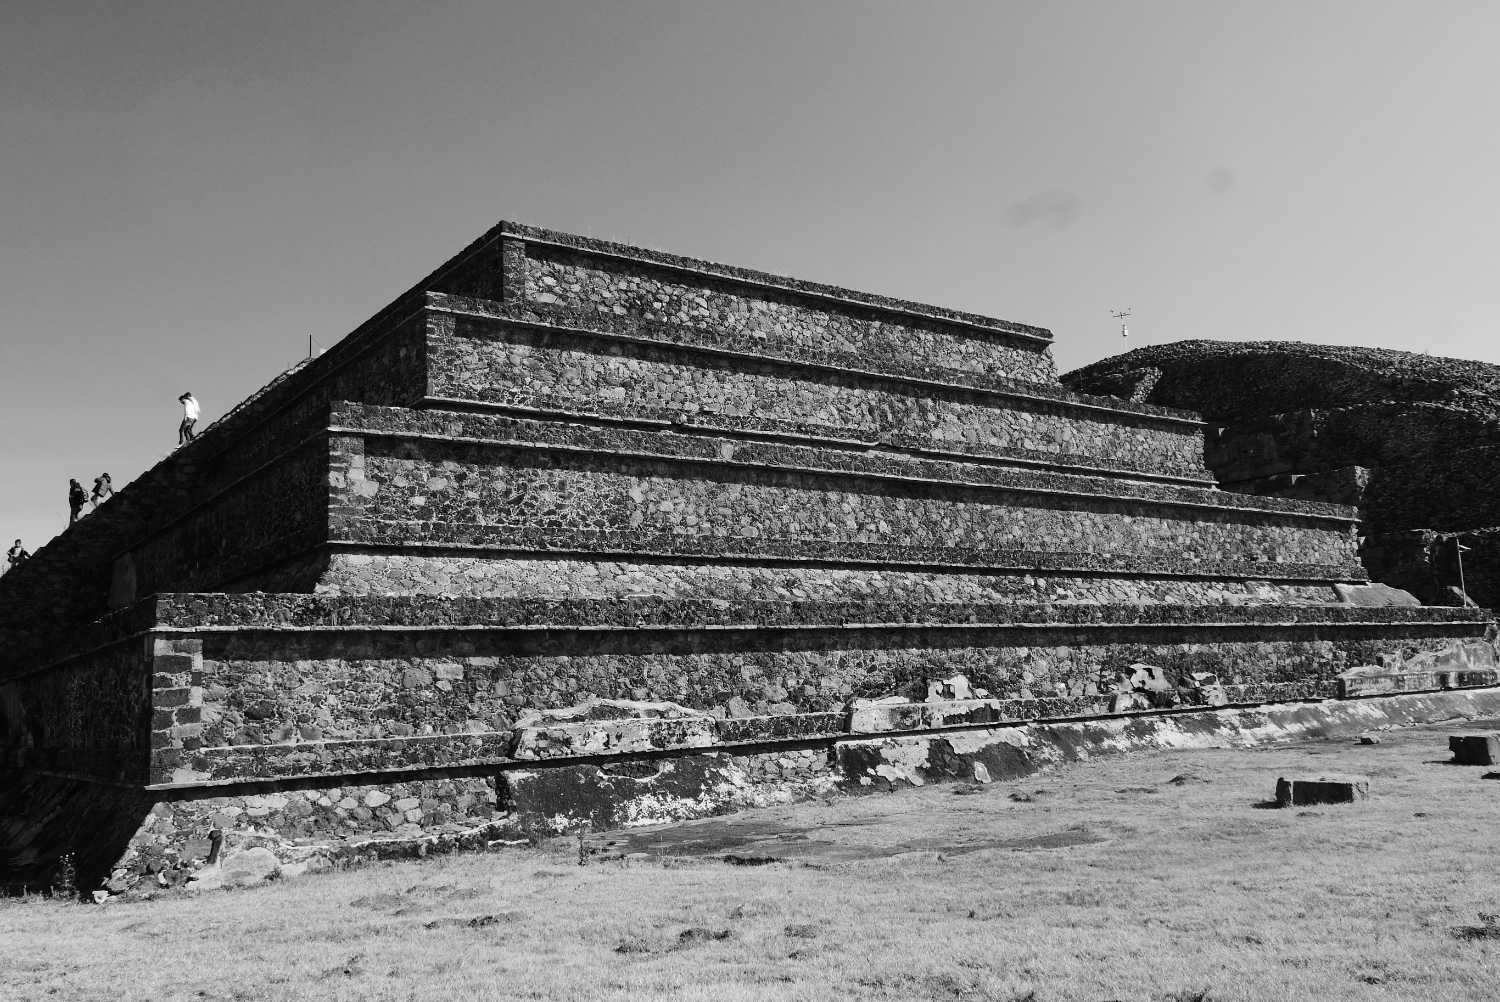 Temple of the Serpent in Teotihuacan